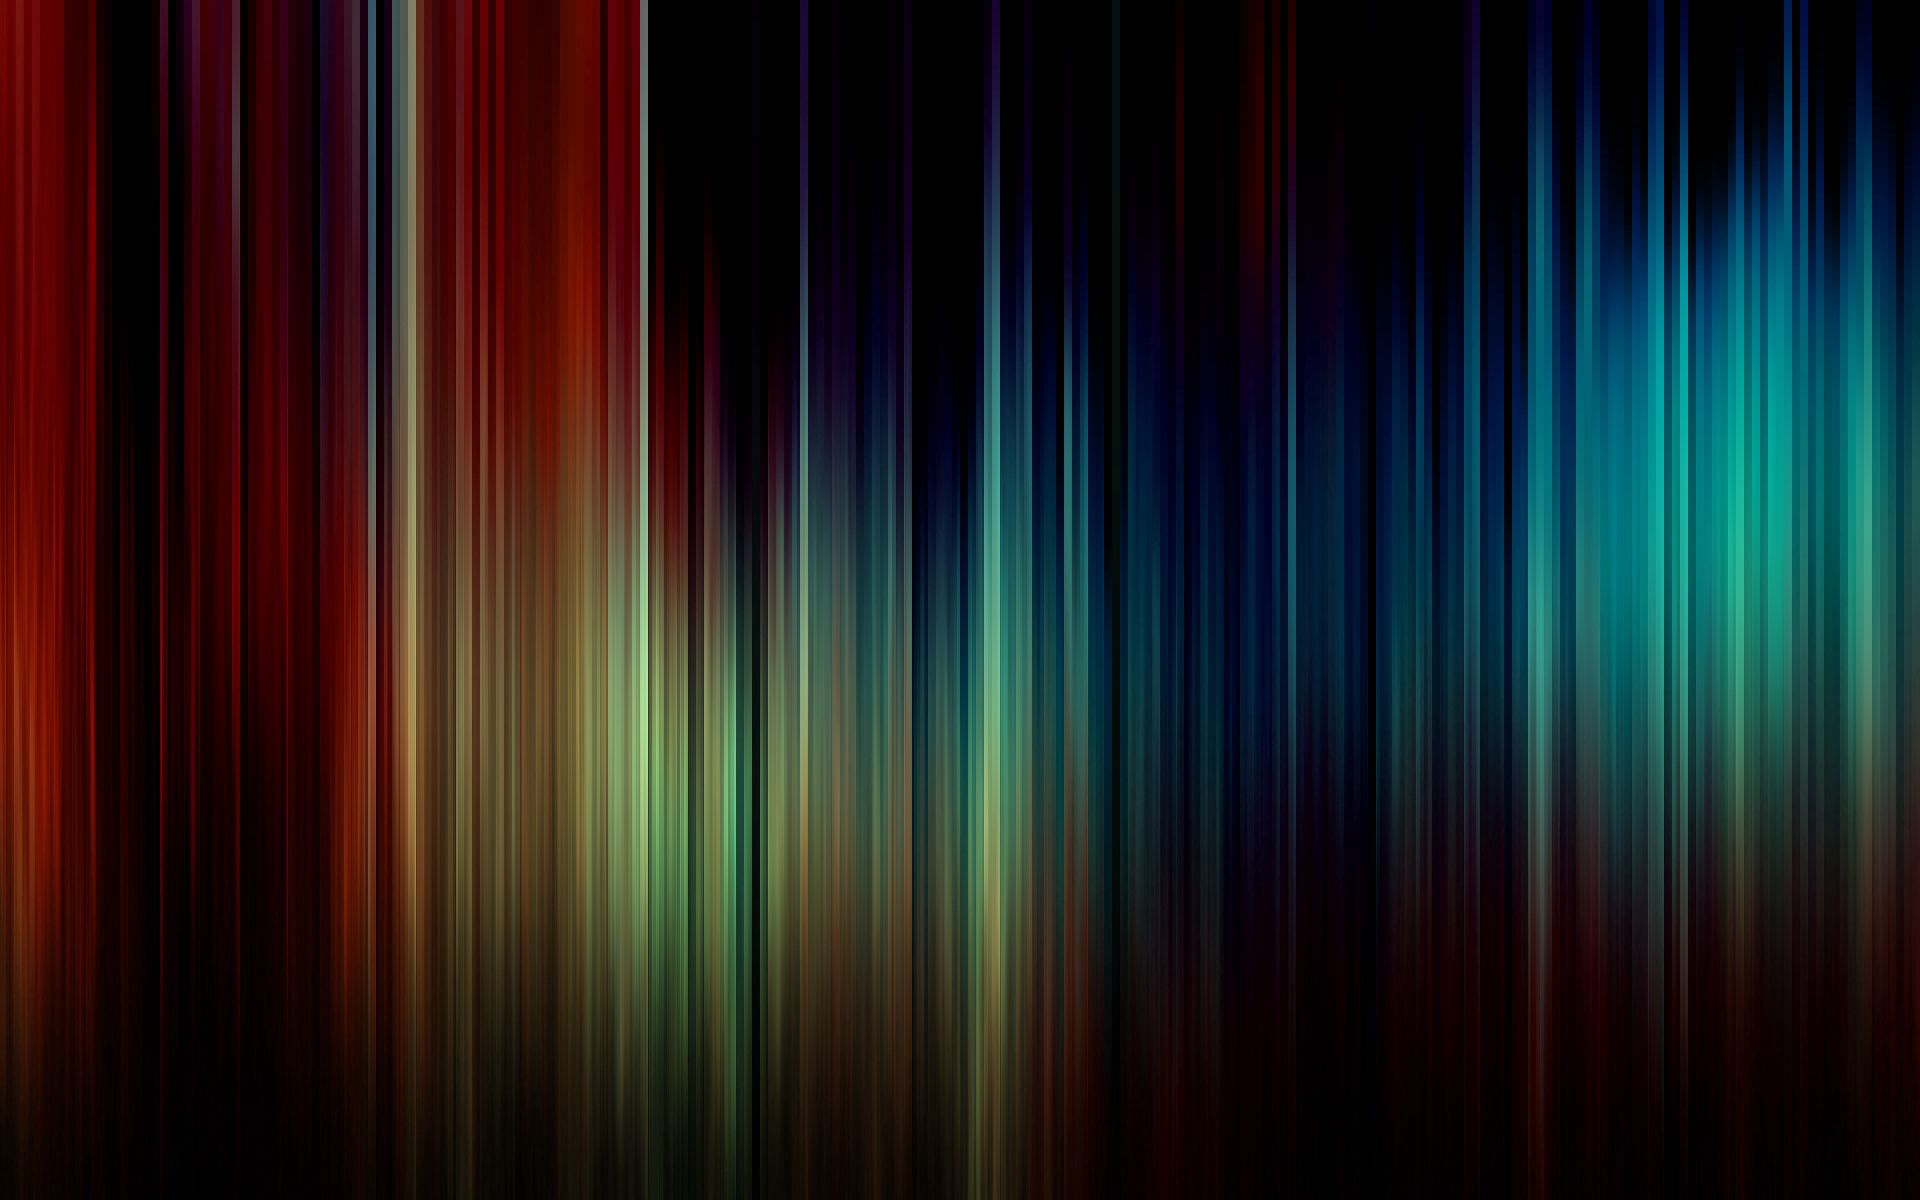 113116 free wallpaper 2160x3840 for phone, download images lines, spectrum, textures, strips 2160x3840 for mobile